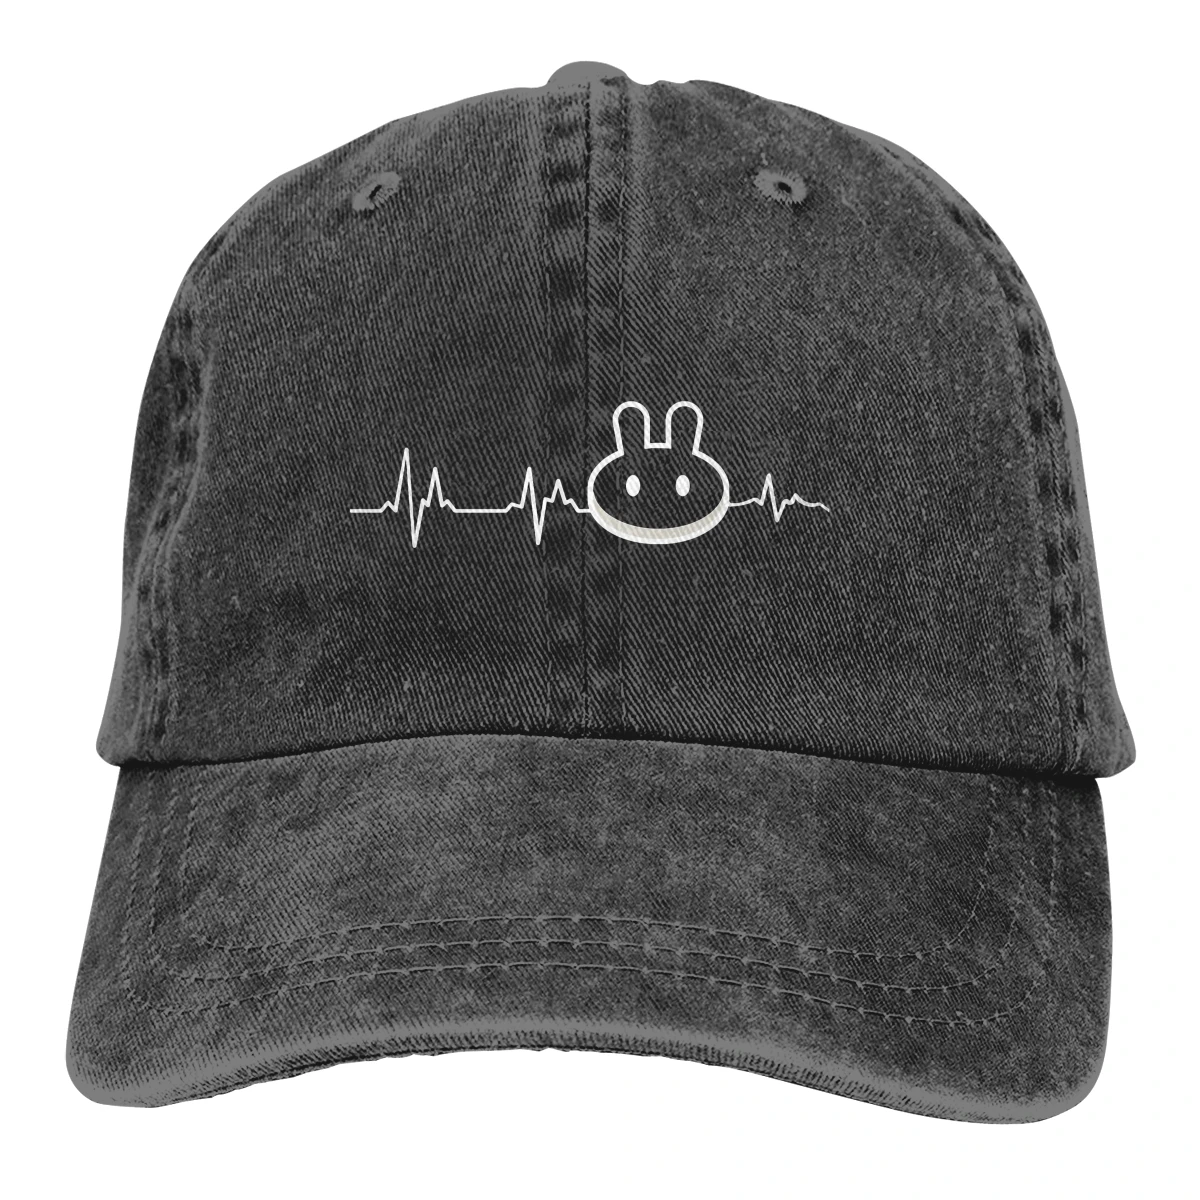 

Washed Men's Baseball Cap To The Moon Heartbeat Trucker Snapback Caps Dad Hat PancakeSwap Cake Crypto Miners Golf Hats